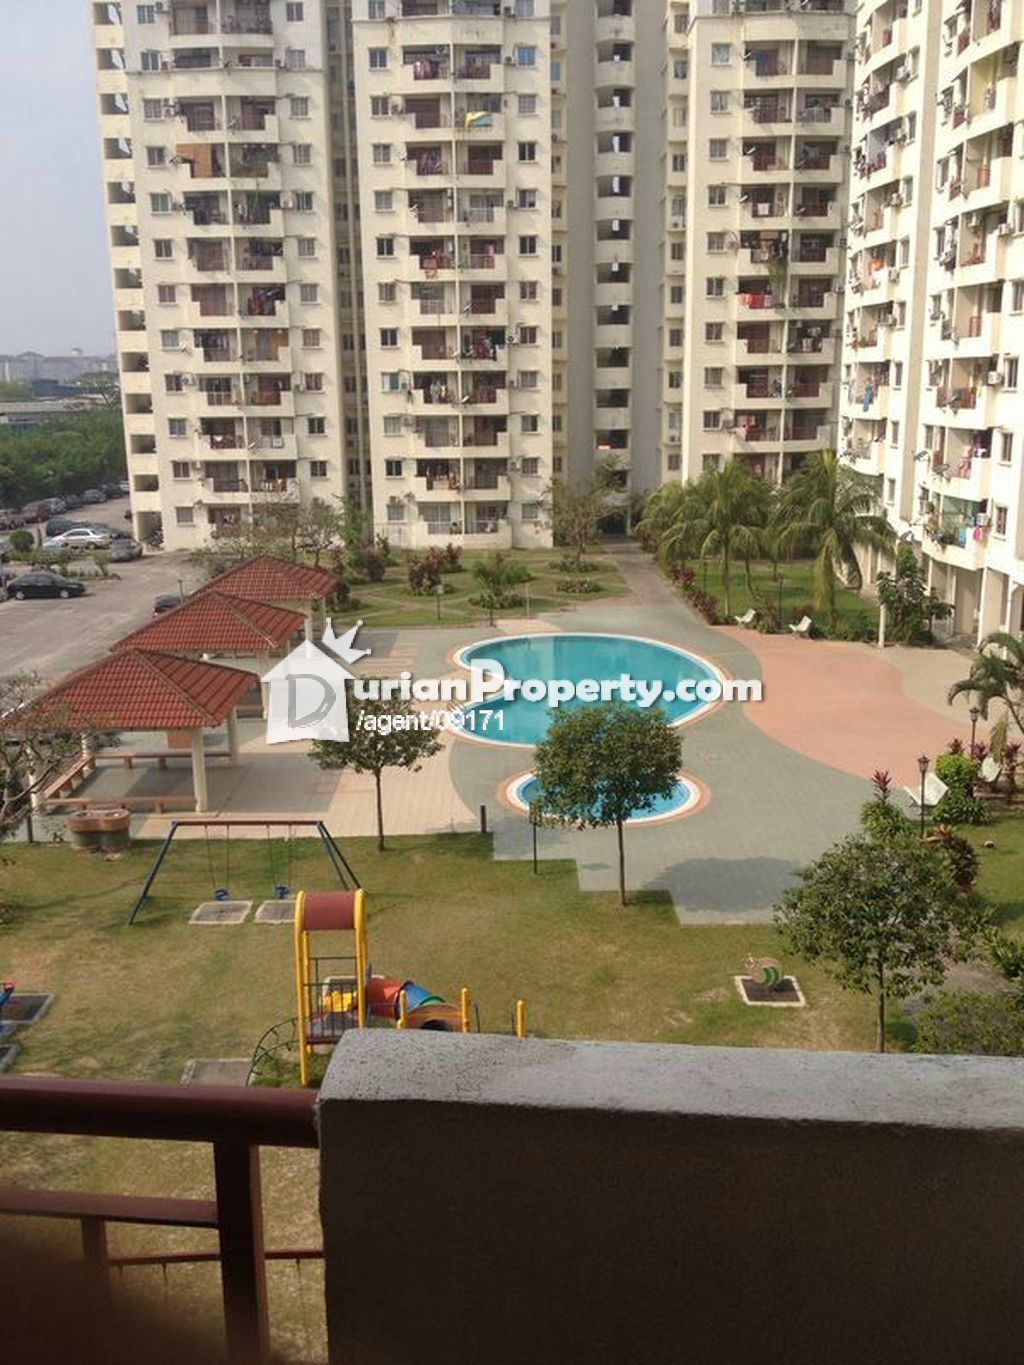 Condo For Sale At Pandan Mewah Heights Pandan For Rm 380 000 By Jeff Ng Durianproperty